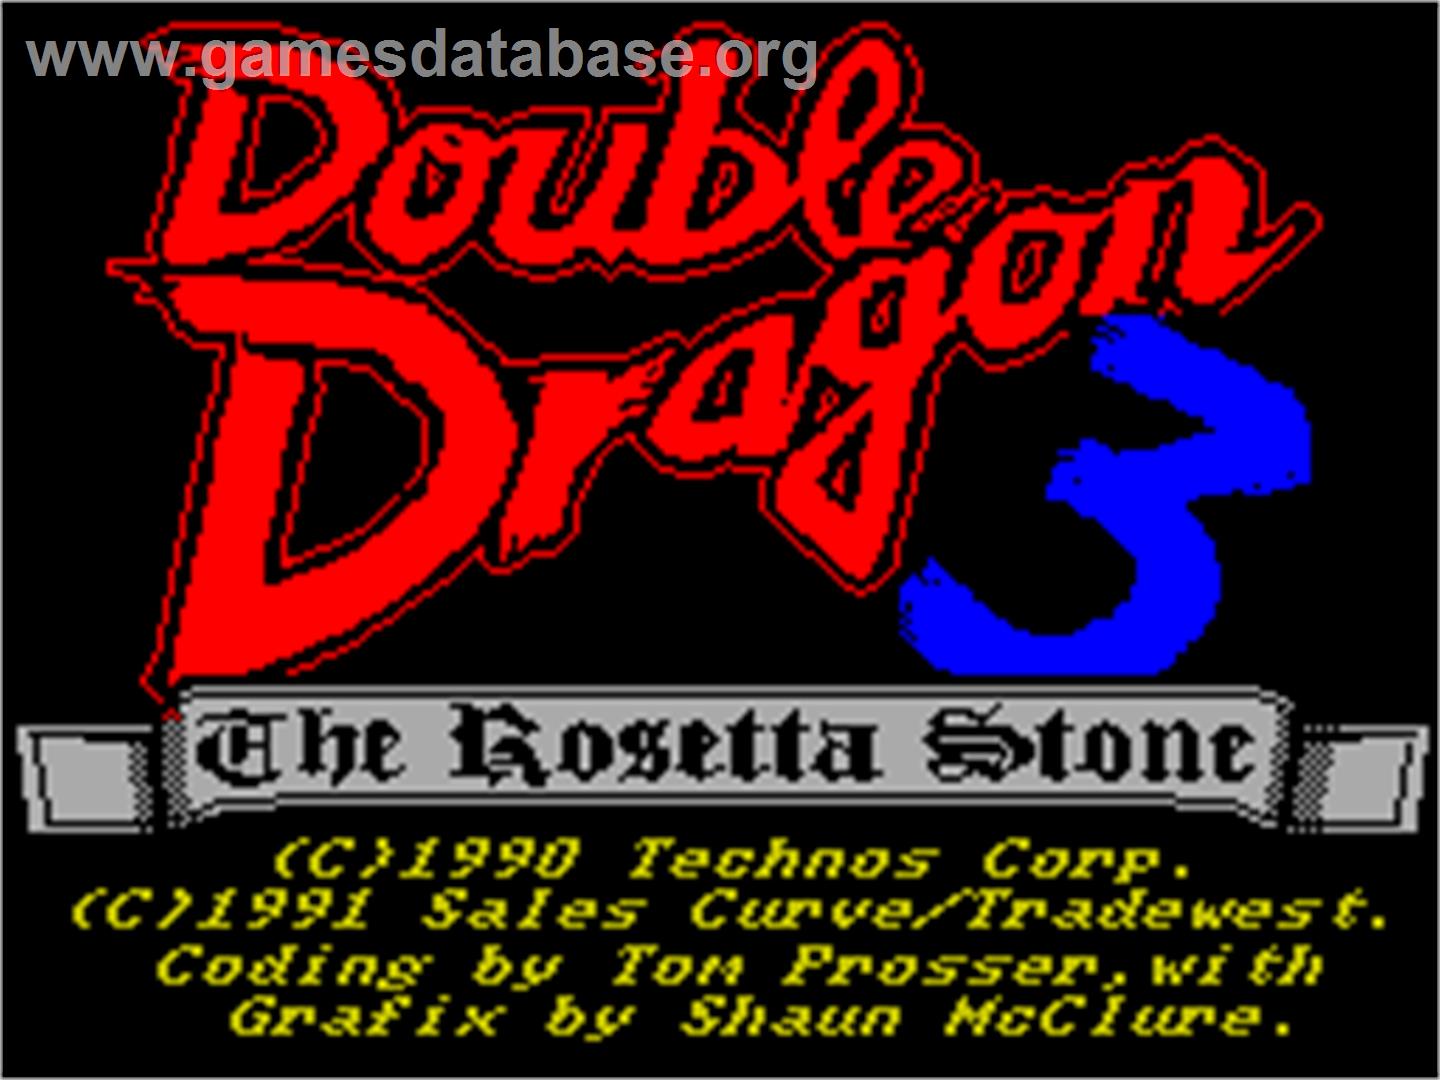 Double Dragon III: The Sacred Stones - Sinclair ZX Spectrum - Artwork - Title Screen